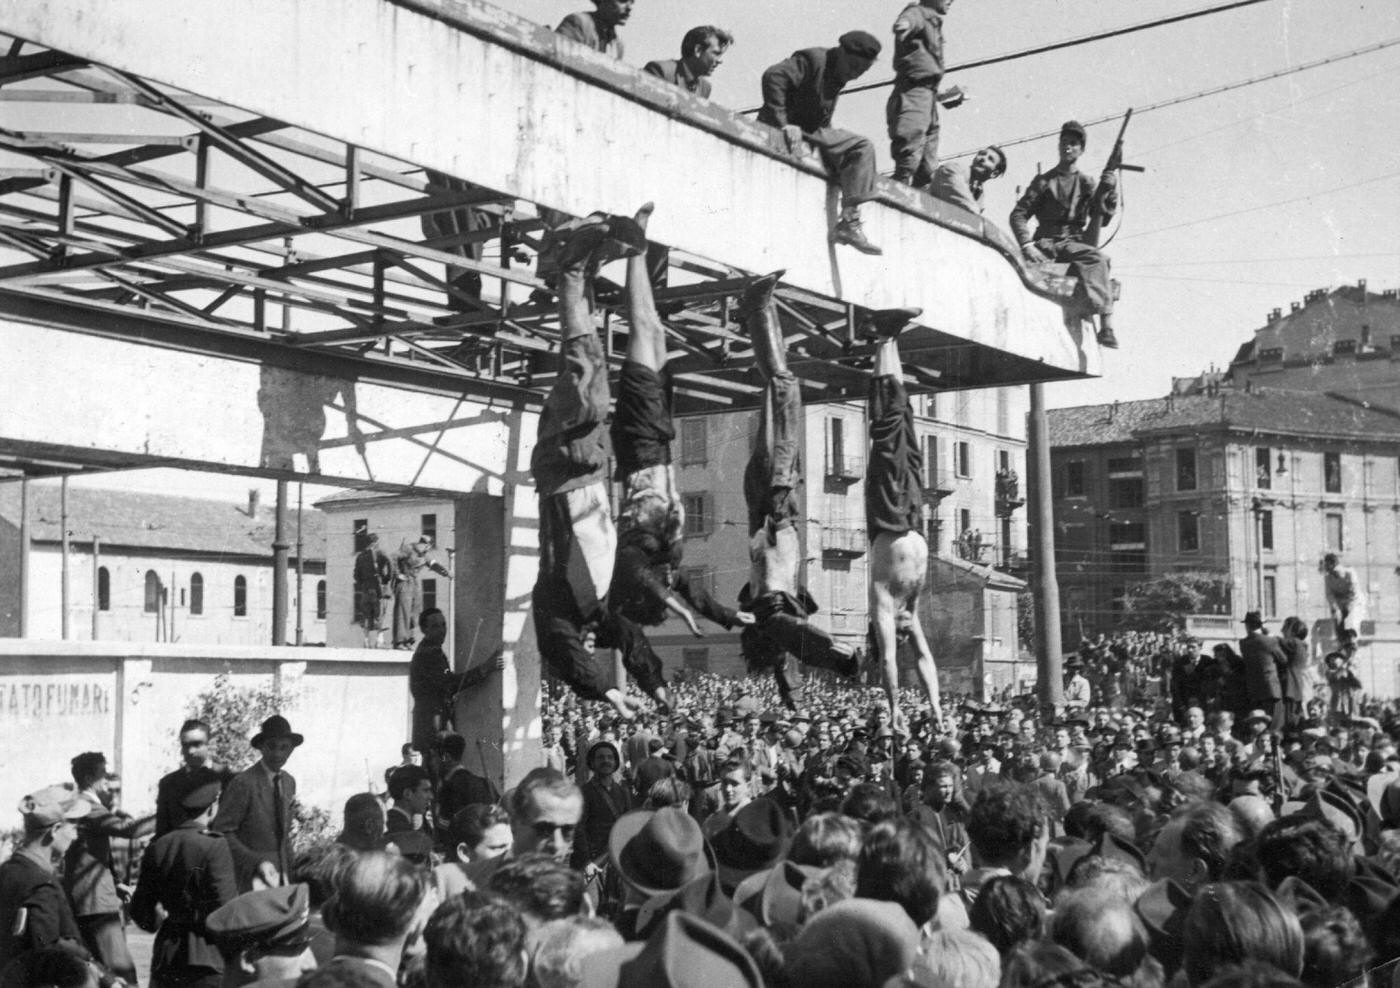 Mussolini and Clara Petacci's Bodies Hanged After Failed Escape, 1945